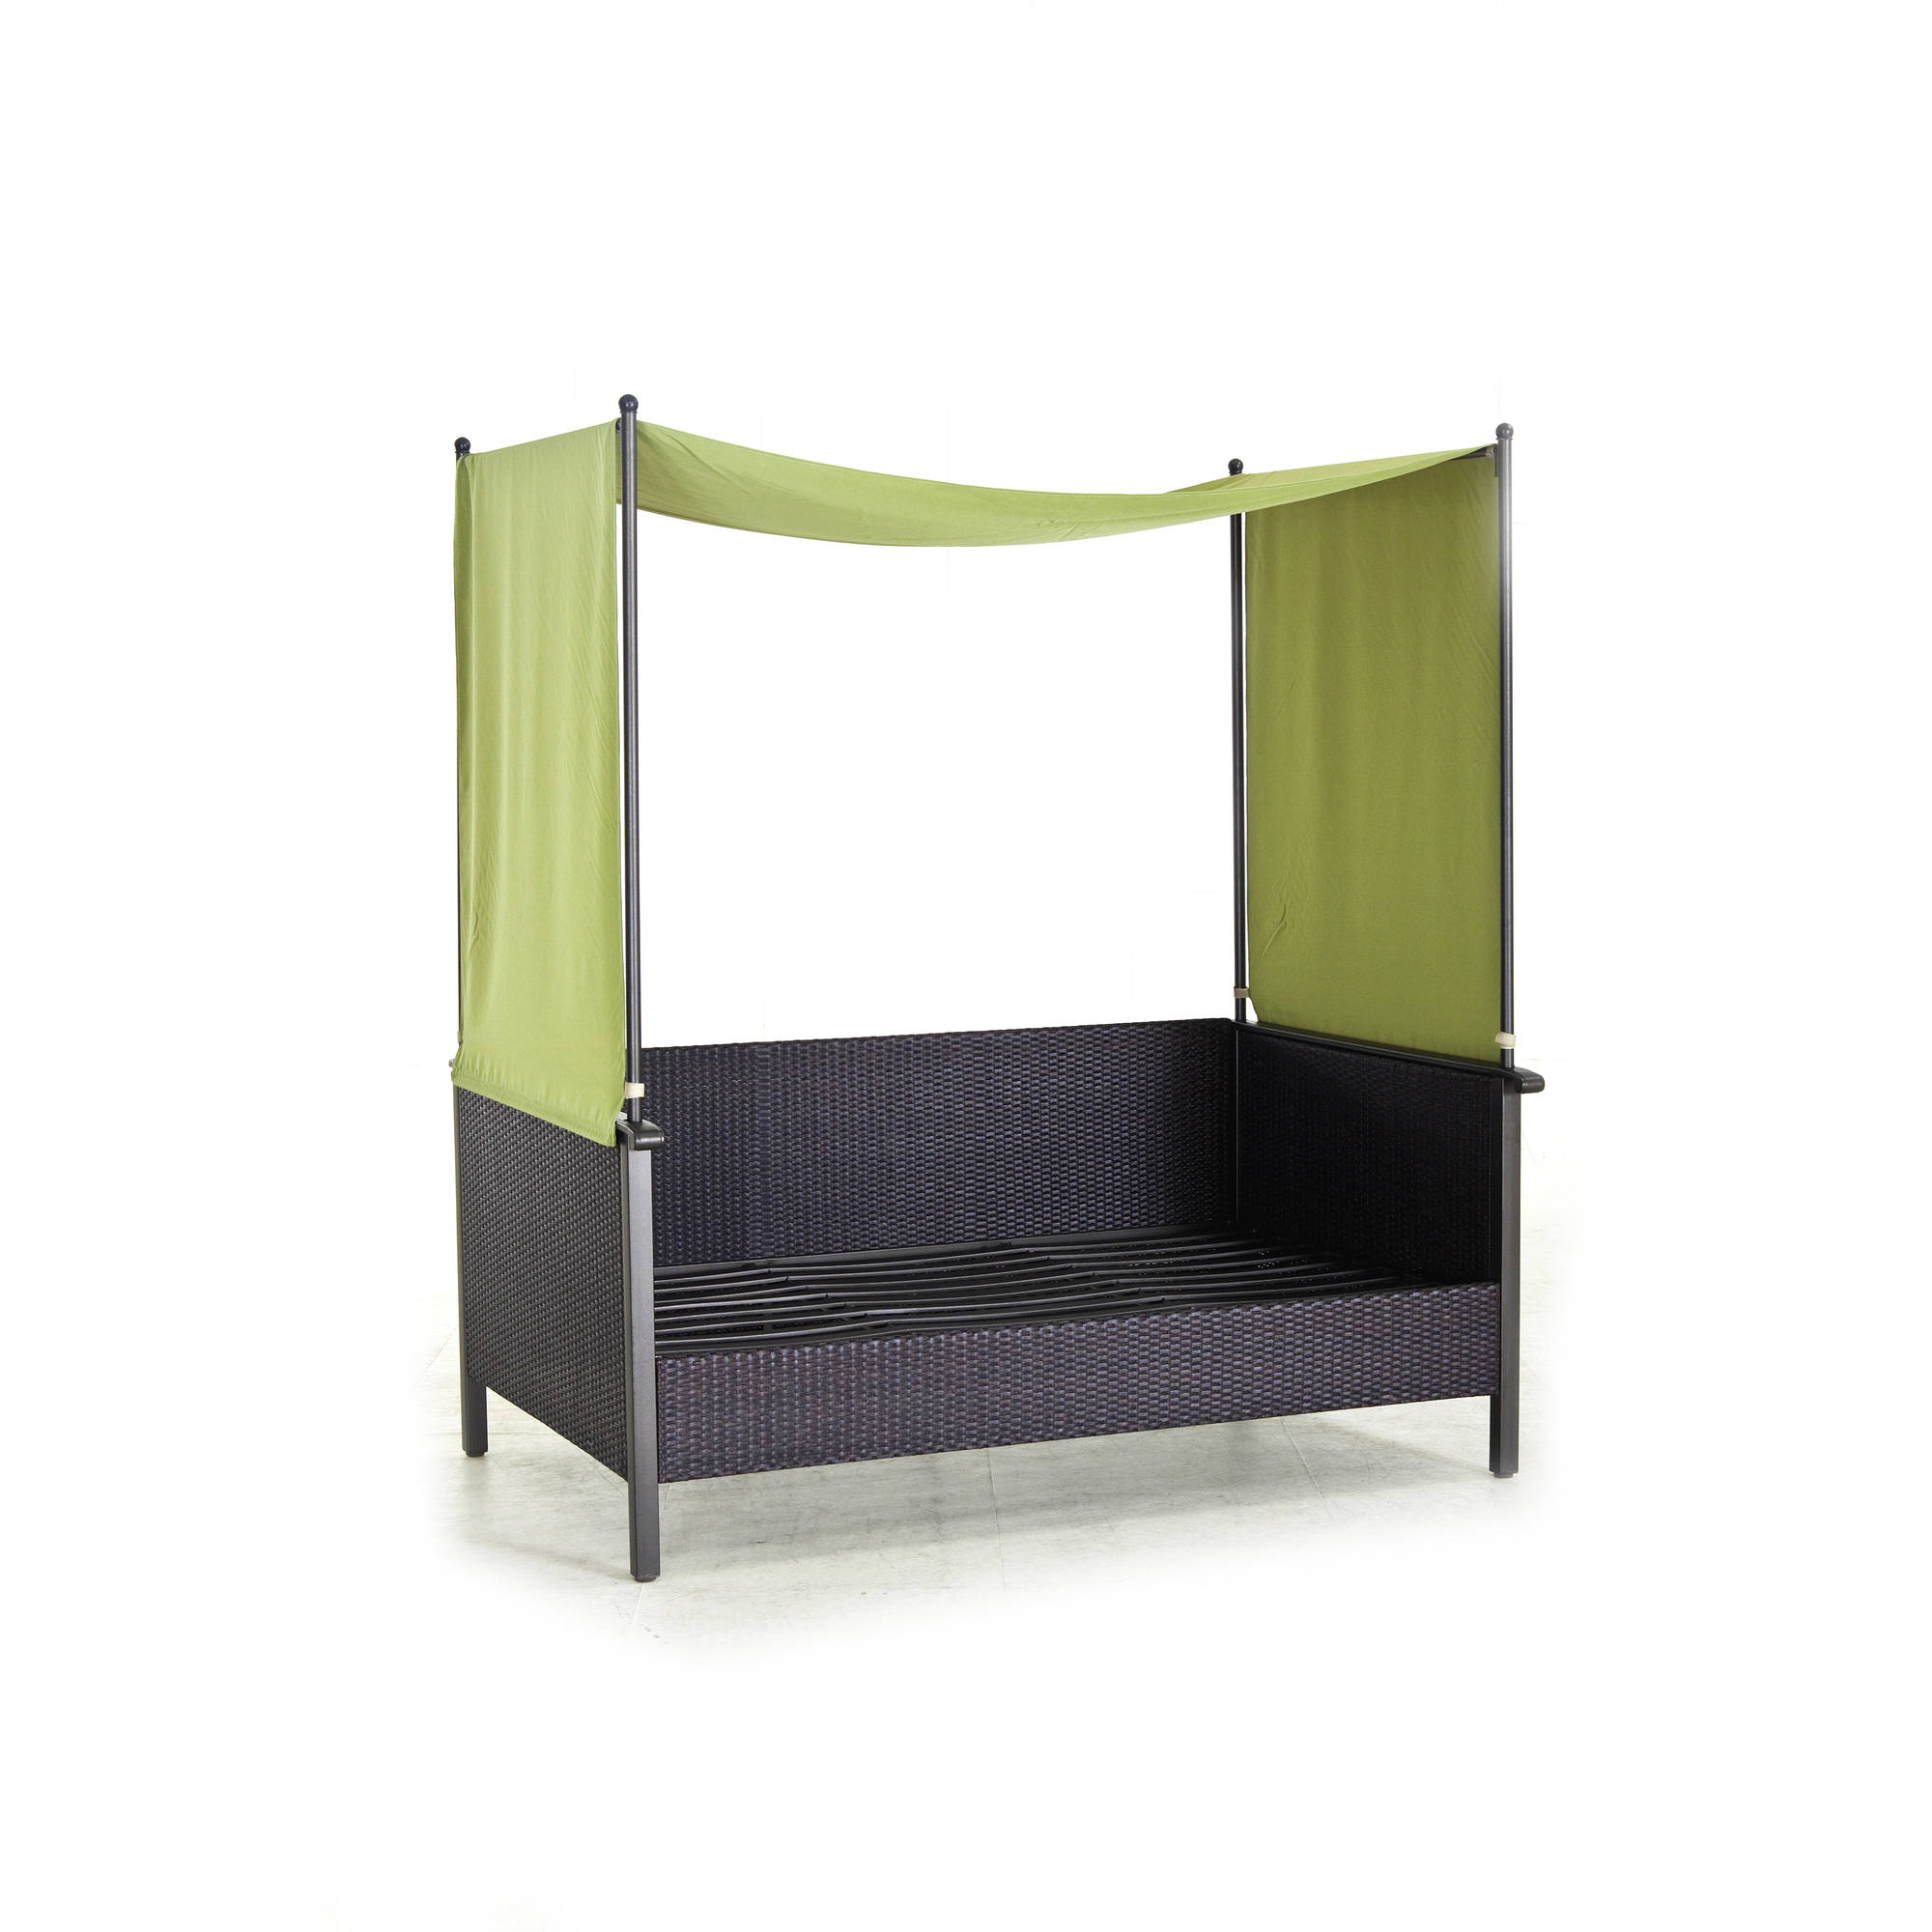 Better Homes & Gardens Providence Outdoor Daybed with Canopy, Green - image 5 of 10